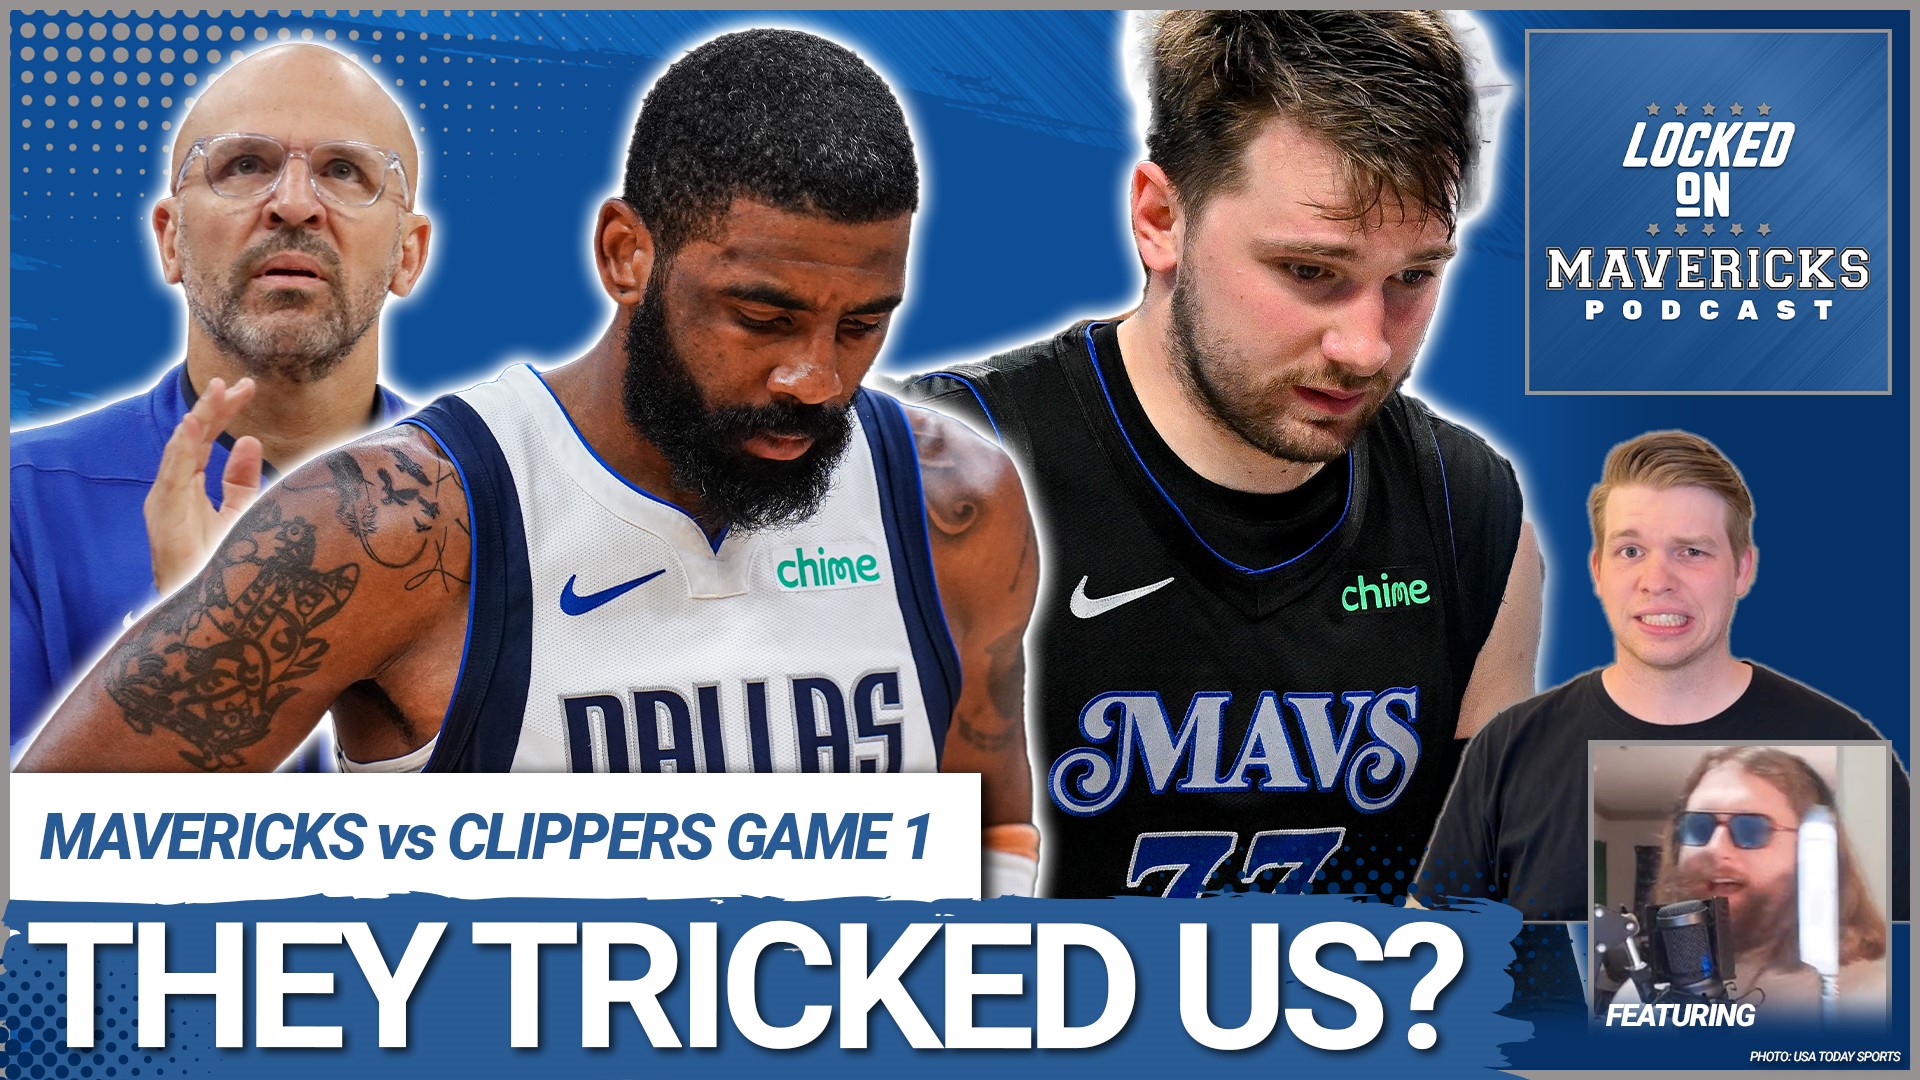 Nick Angstadt & Slightly Biased breakdown the Dallas Mavericks disappointing loss in Game 1 against the Los Angeles Clippers. Why did they start so flat?